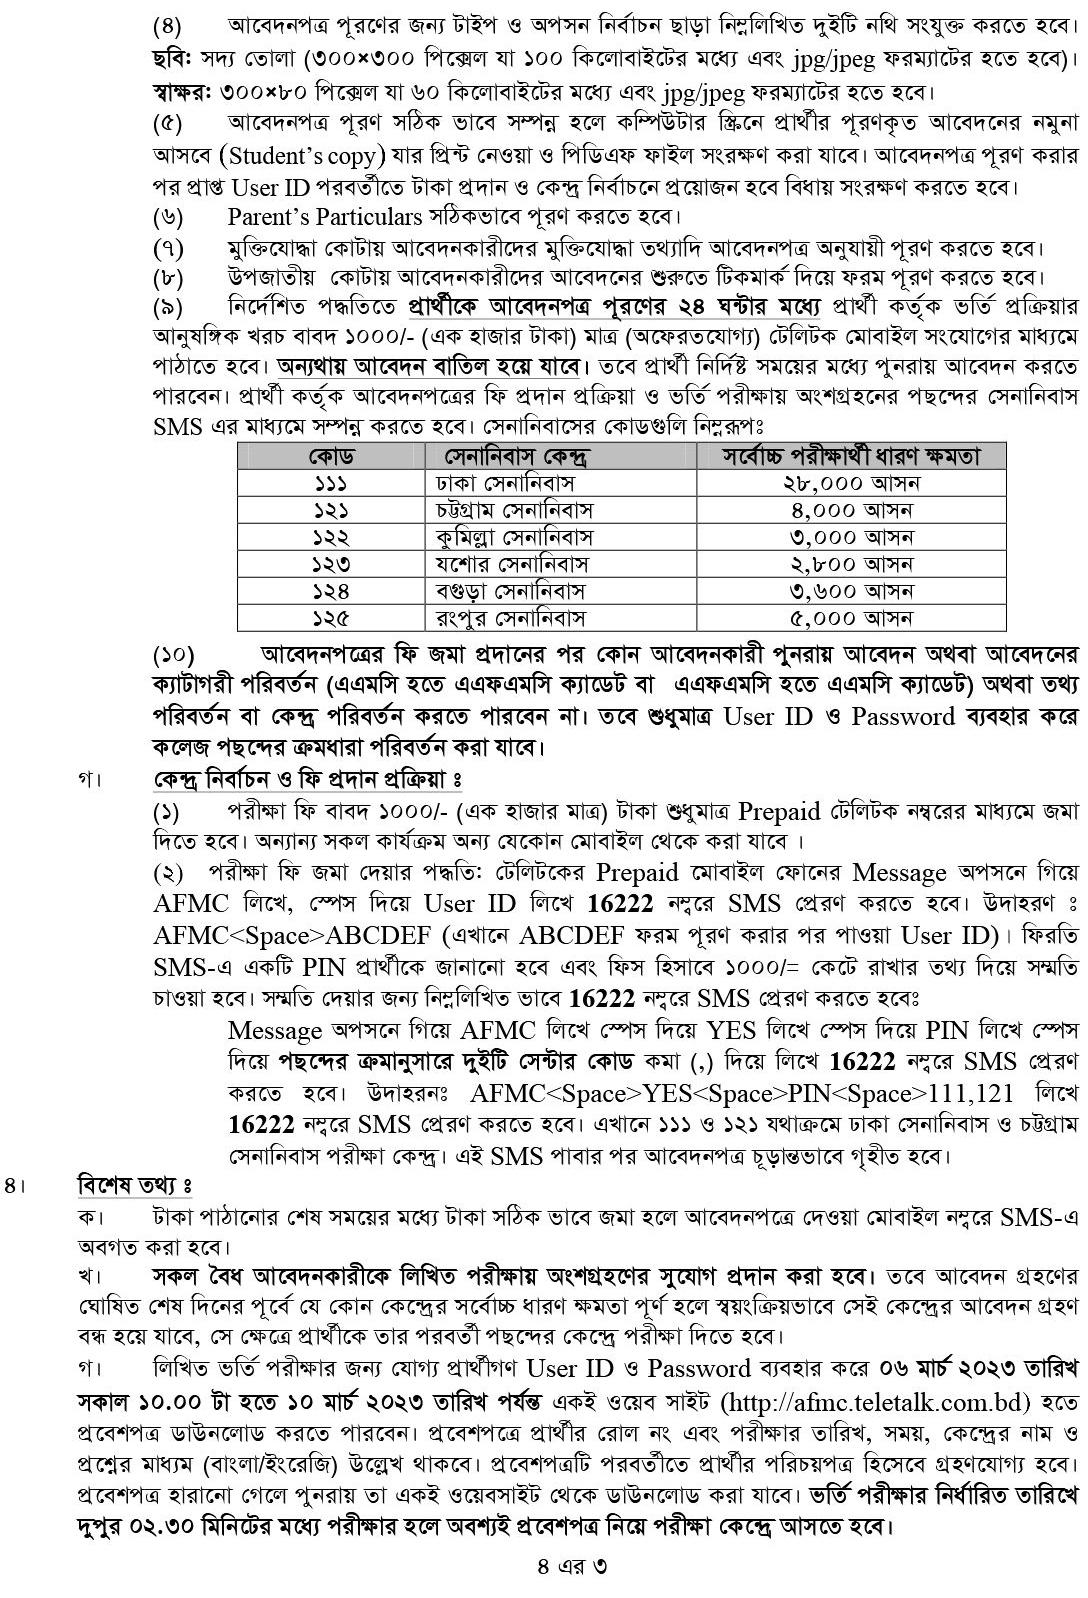 Armed Forces Medical College Admission Circular 2022-23 1